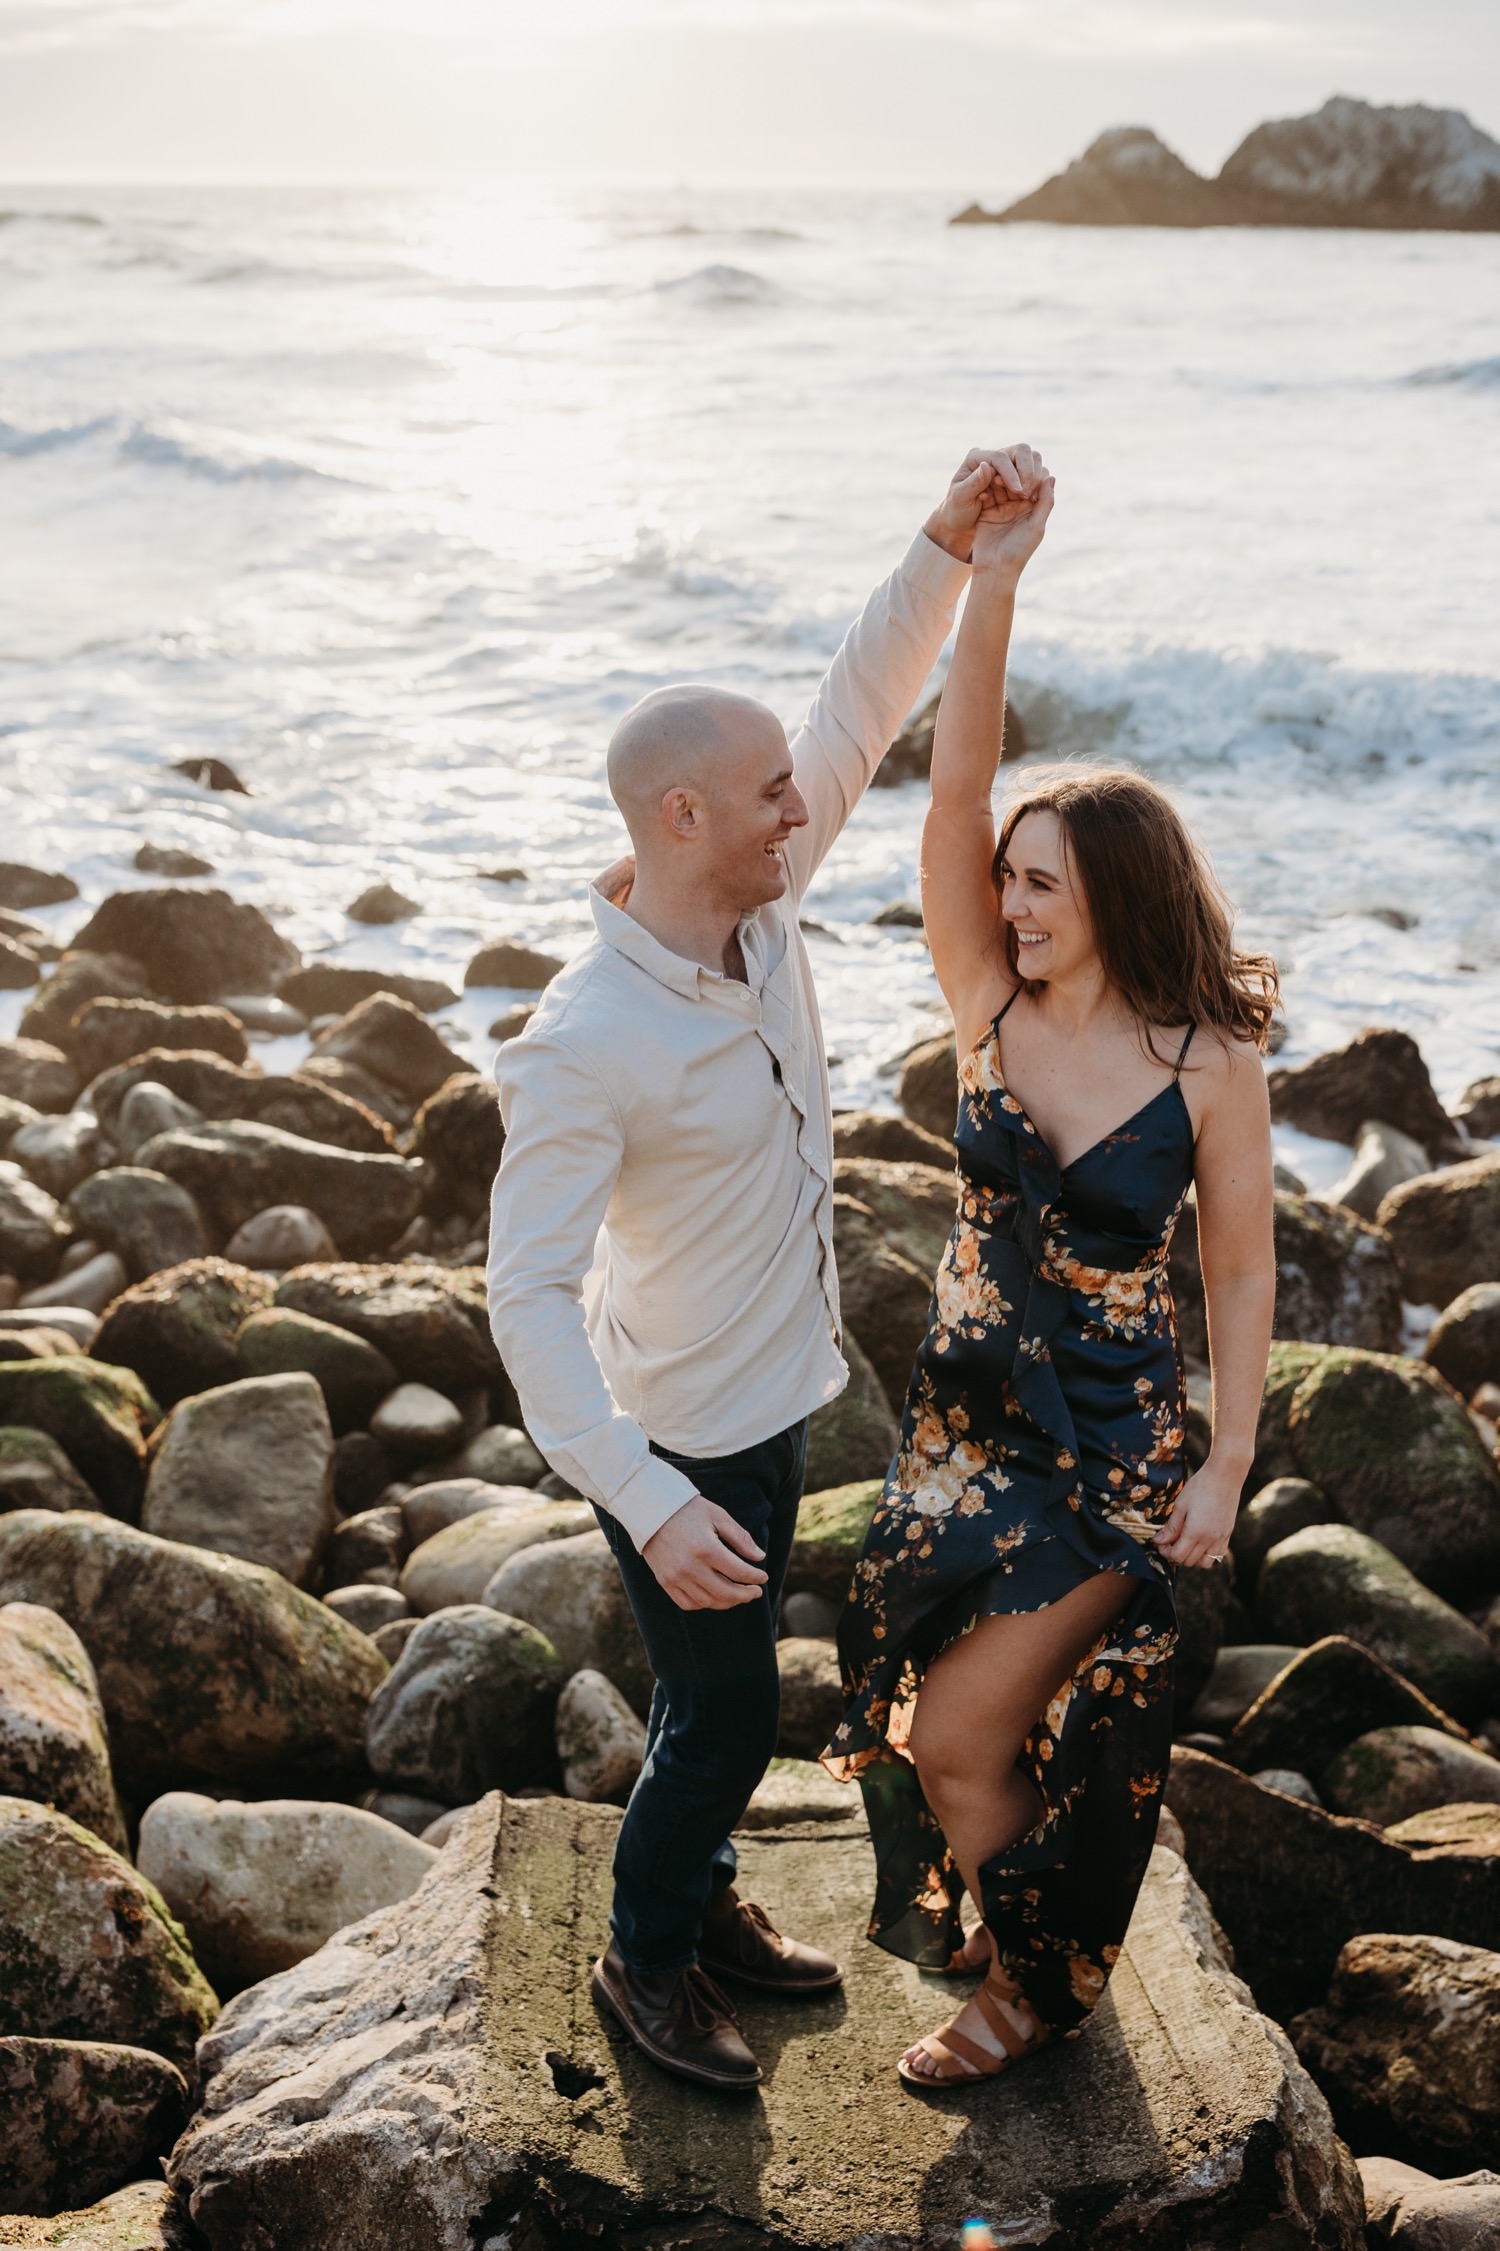 Man spins his fiance during their San Francisco sunset engagement photoshoot.